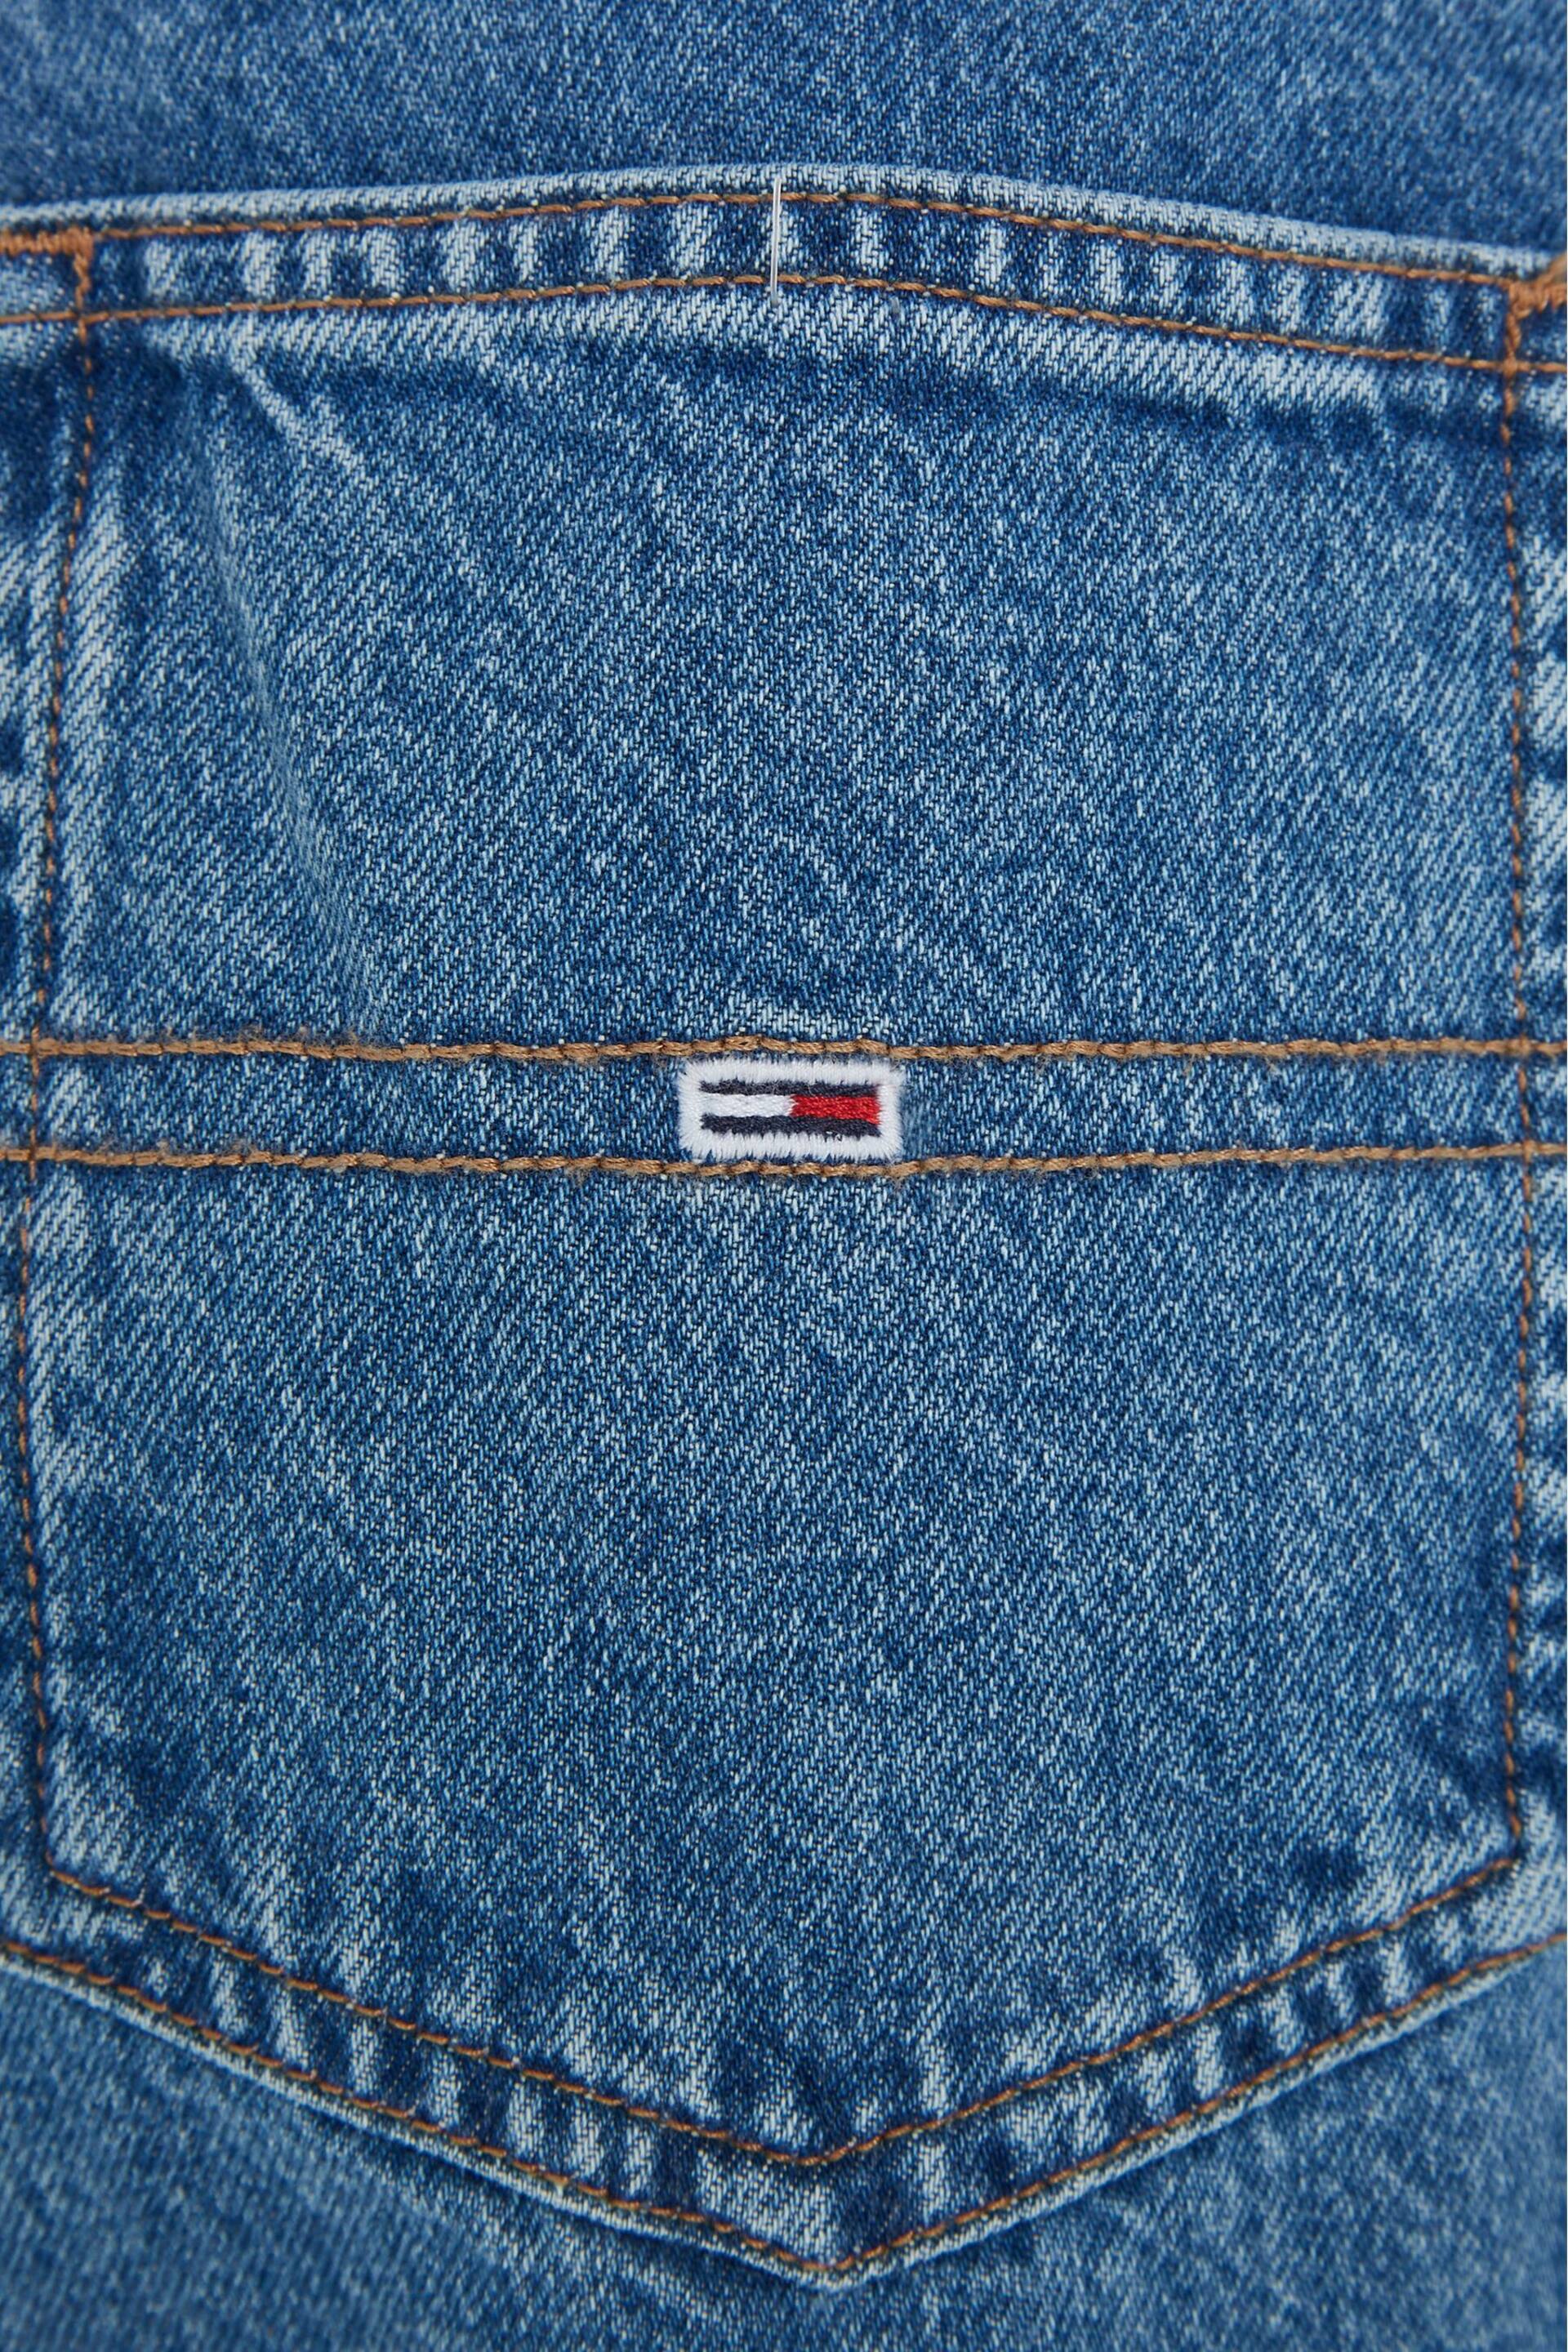 Tommy Jeans Blue Ultra High Rise Tapered Mom Jeans - Image 11 of 11